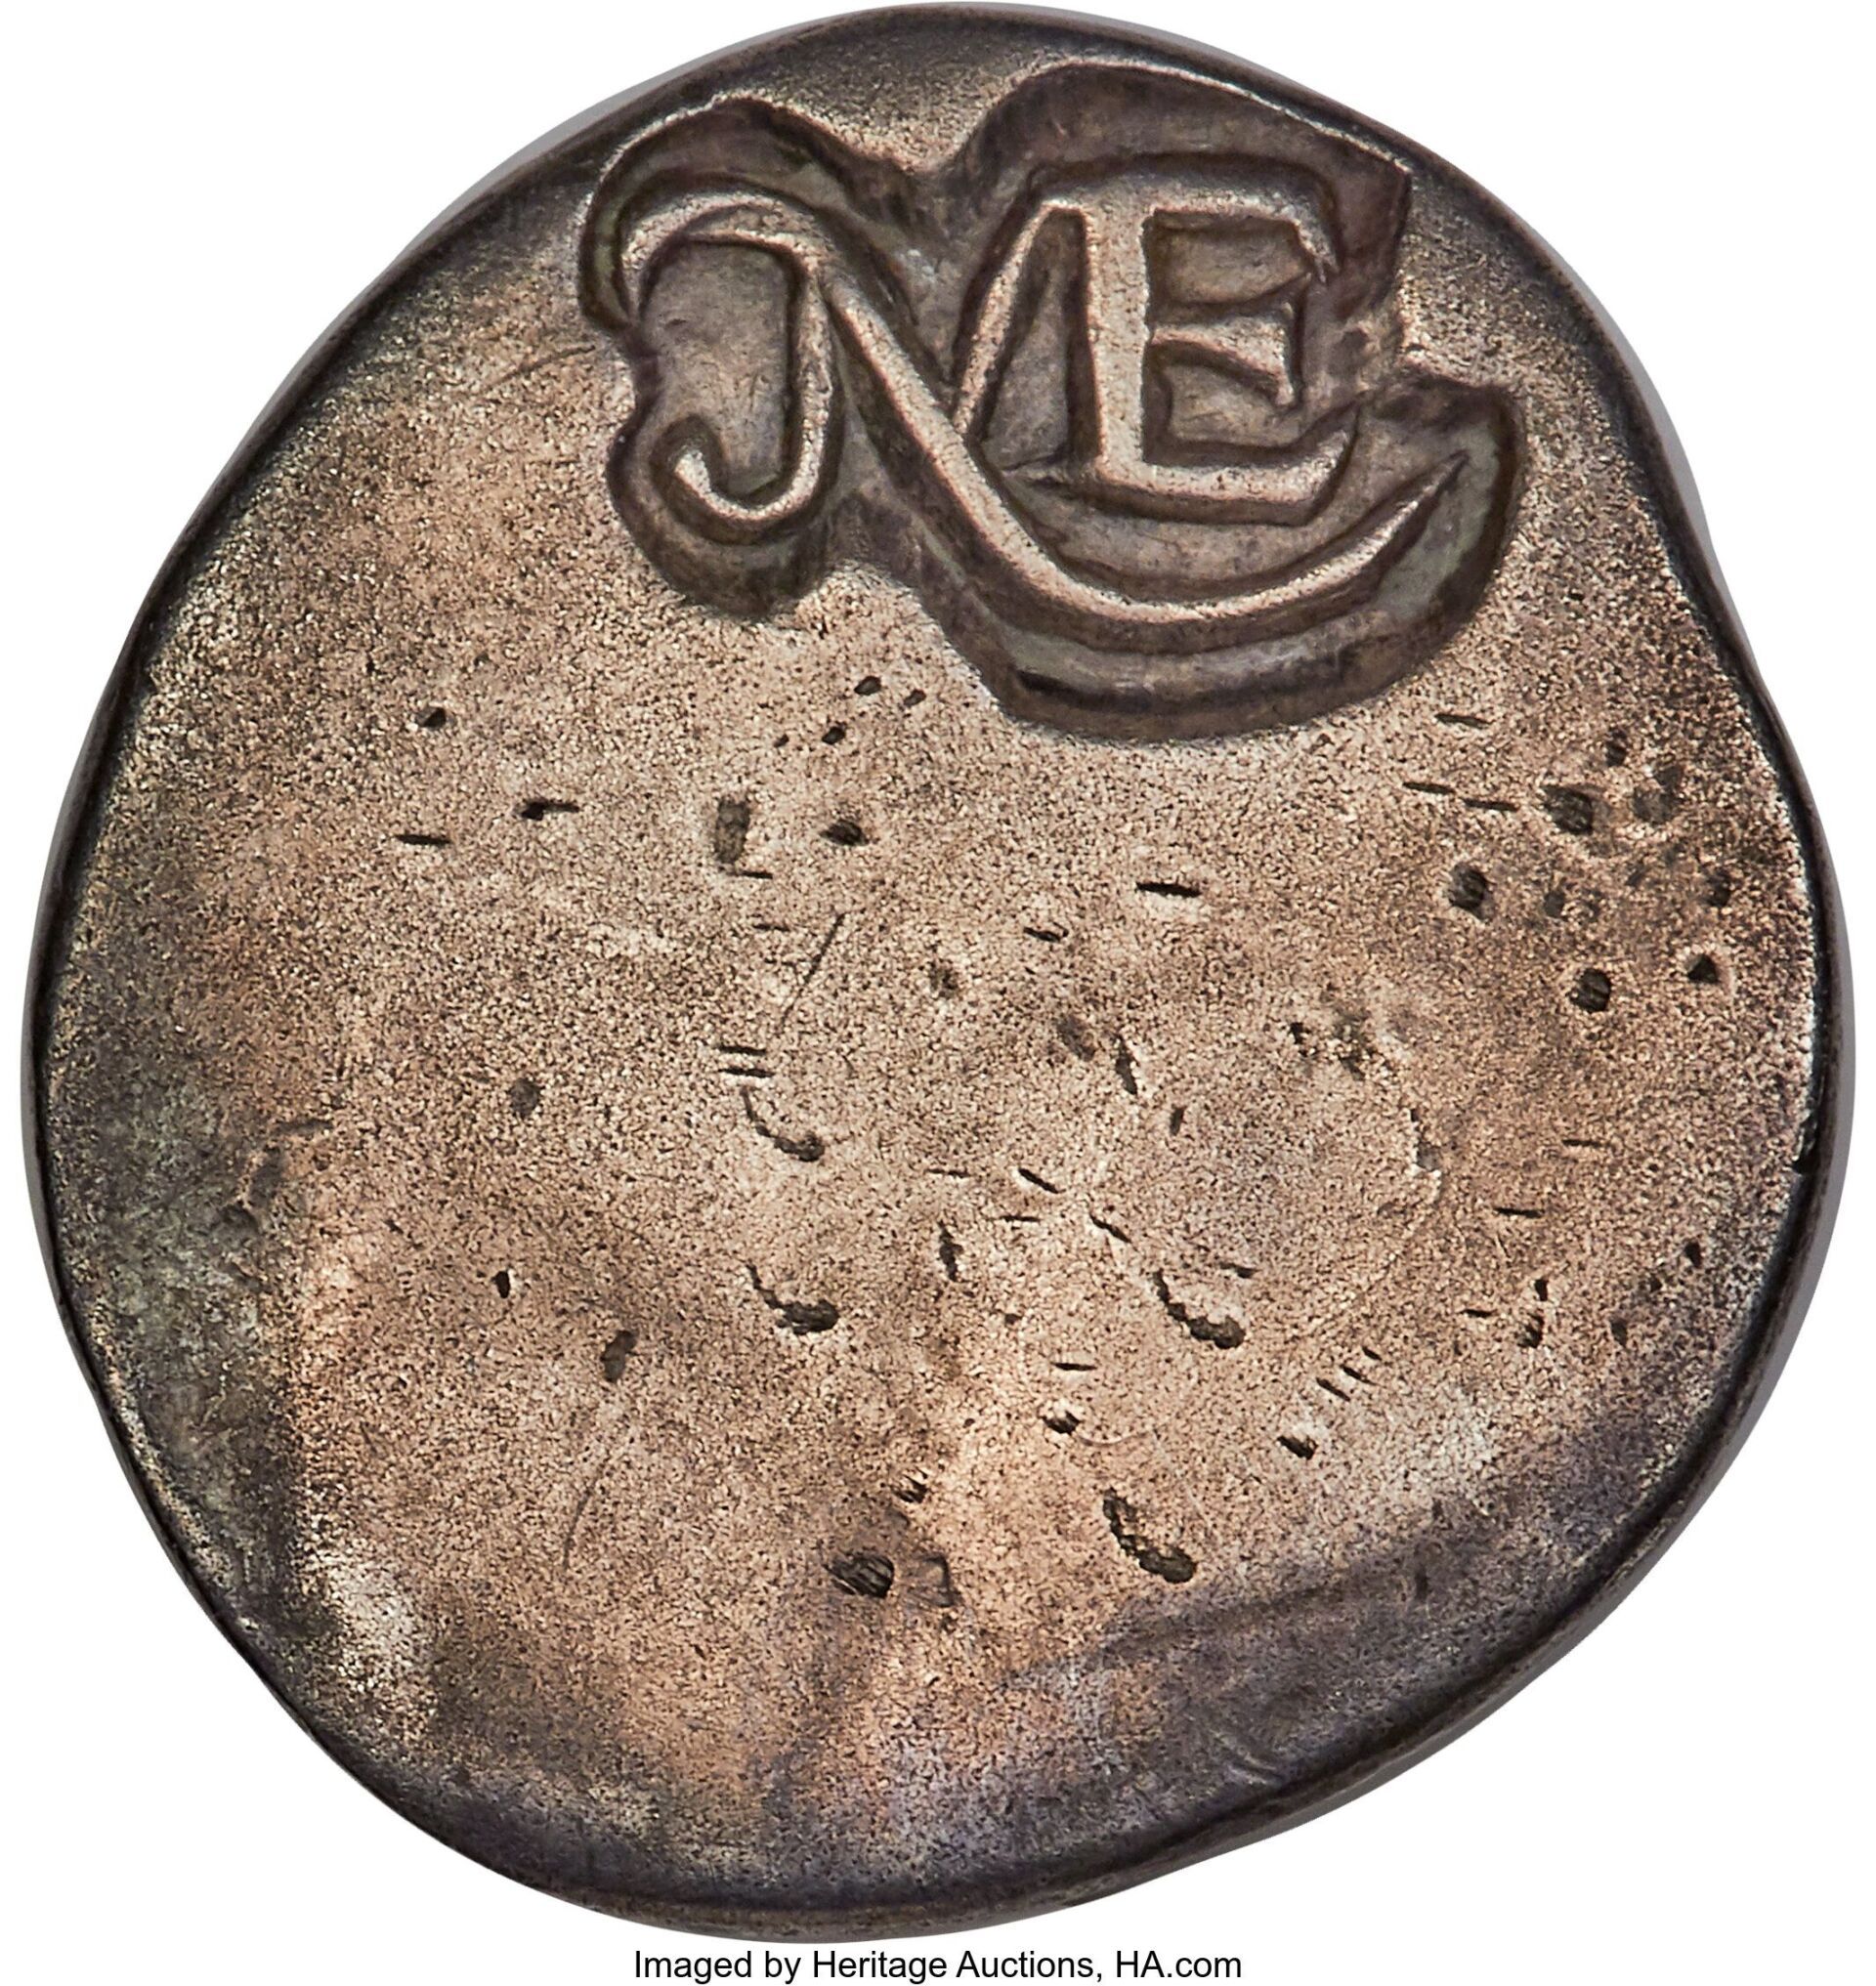 1652 New England Sixpence. Heritage Auctions